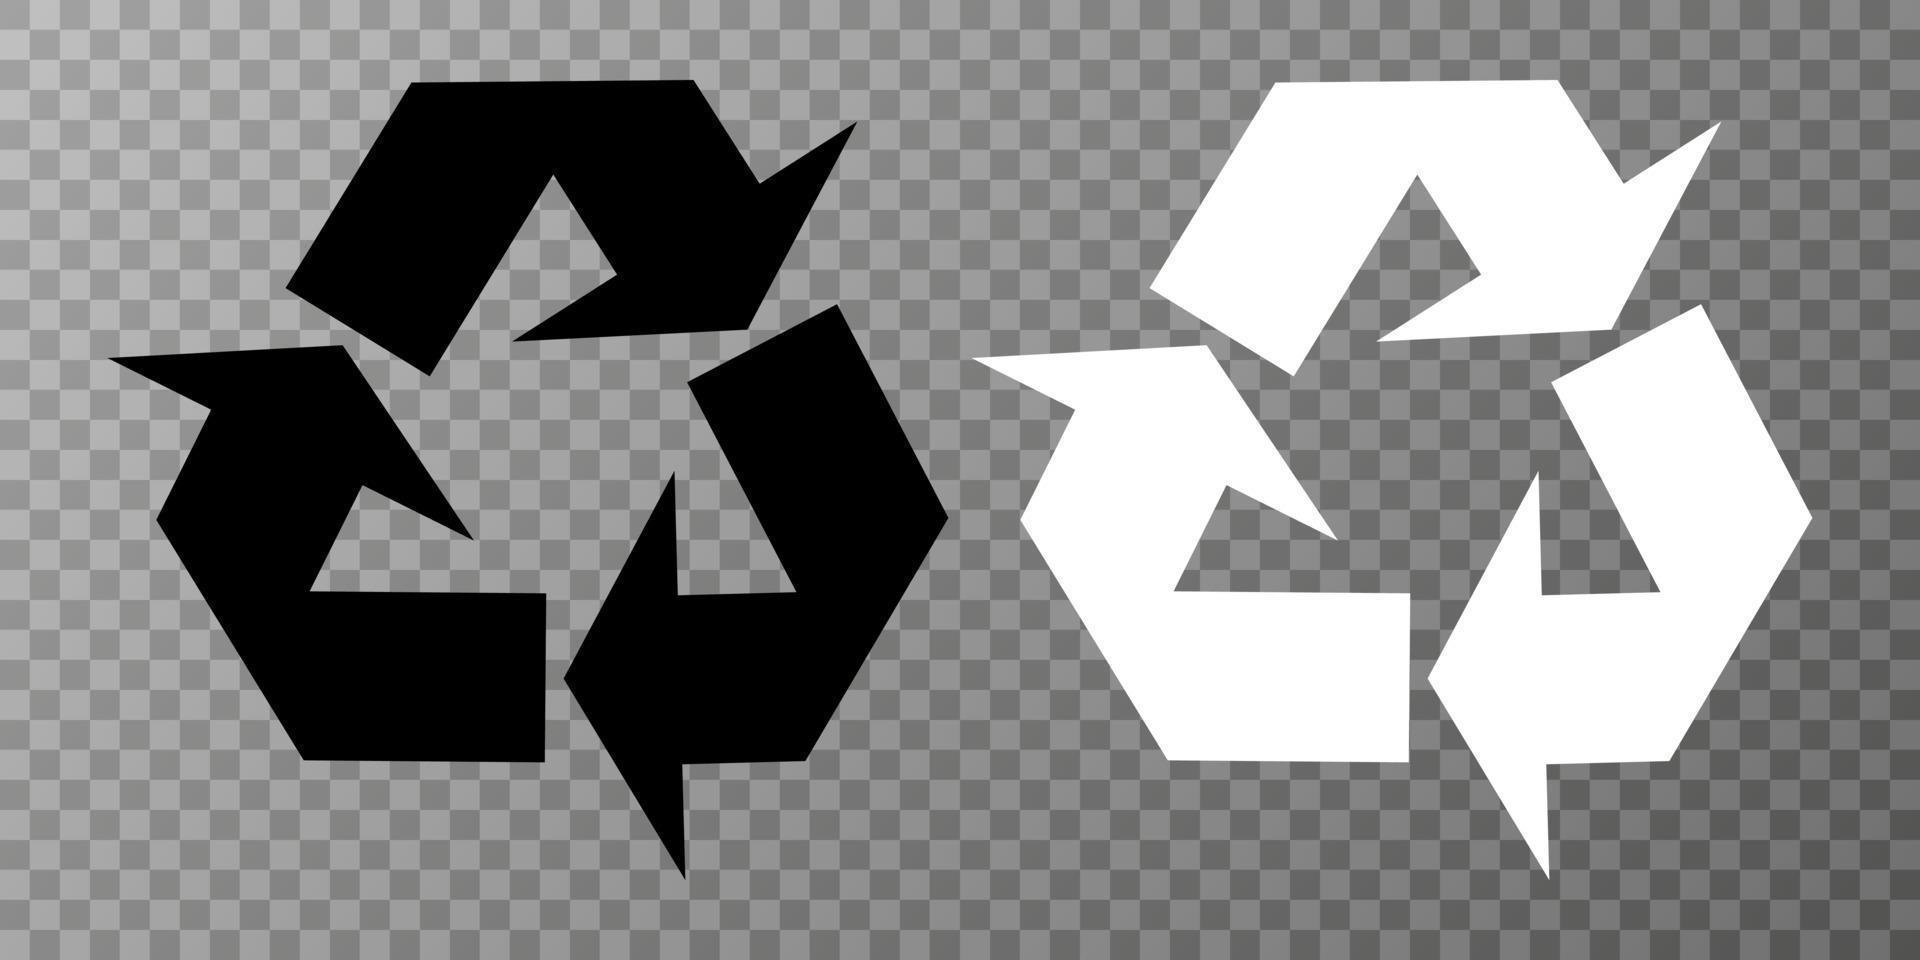 recycle symbool. driehoekig recyclingspictogram. vector